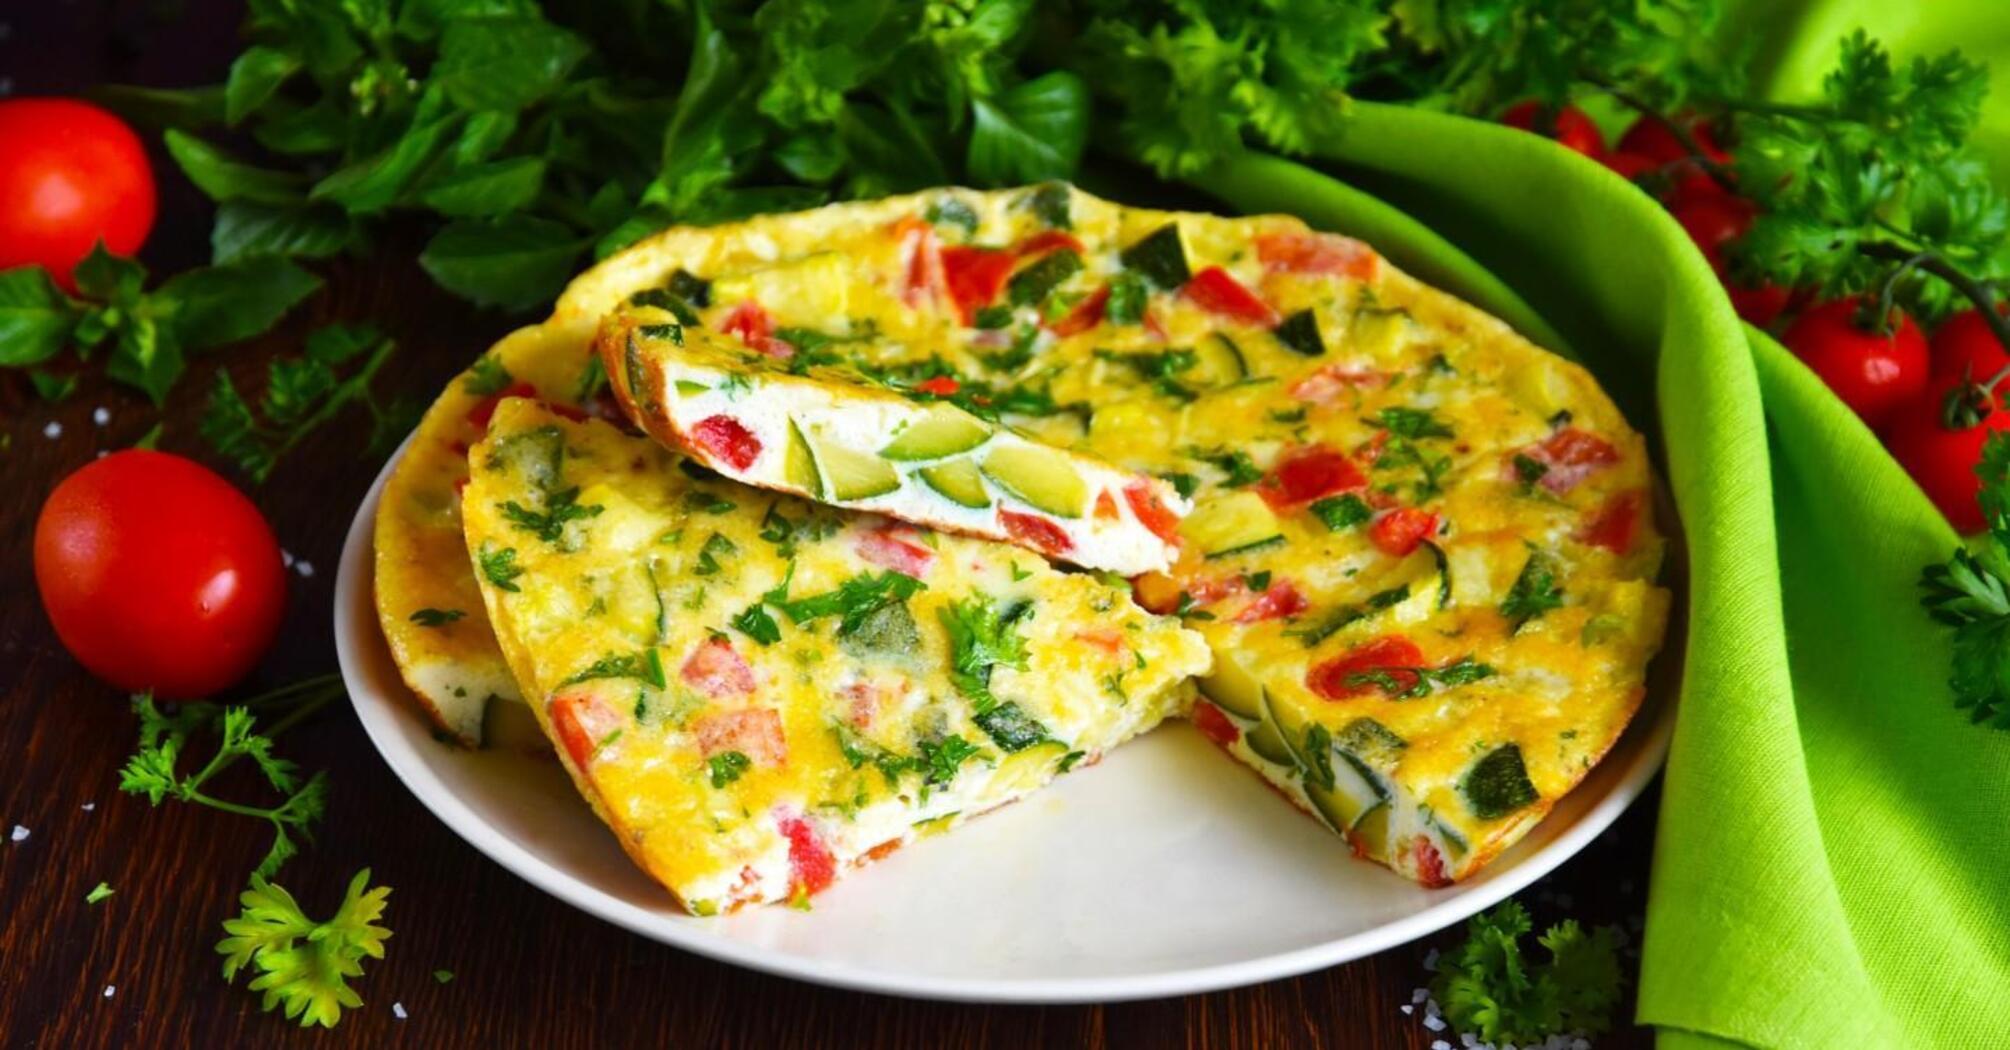 Which recipe for cooking eggs is the healthiest